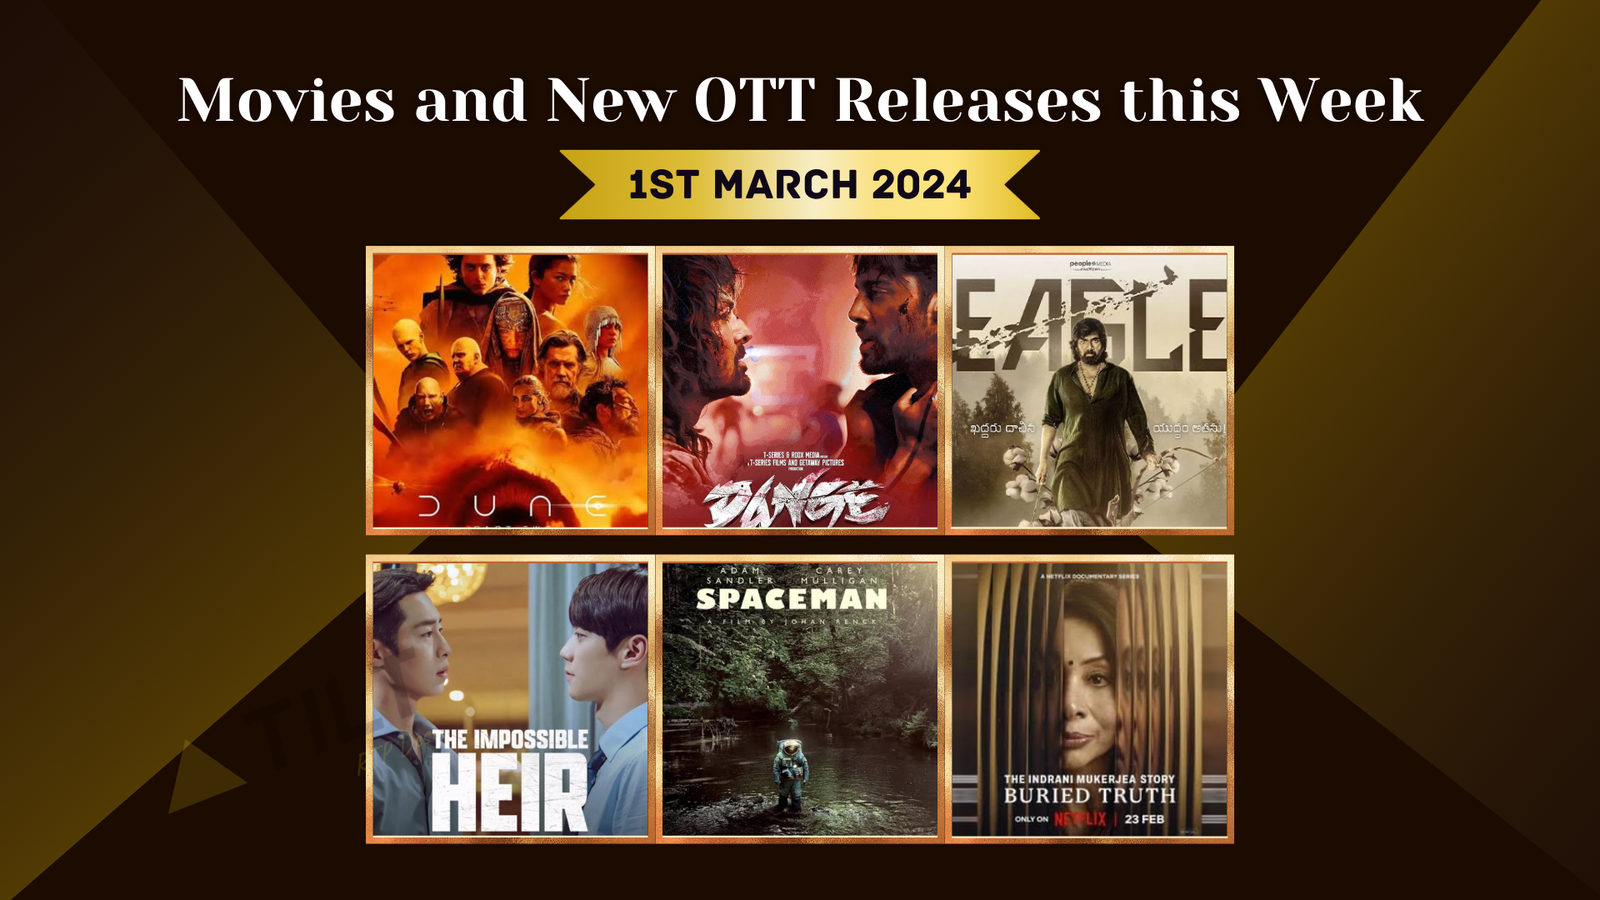 Movies and New OTT Releases this Week, 13th Oct 2023 Triangle Tilt